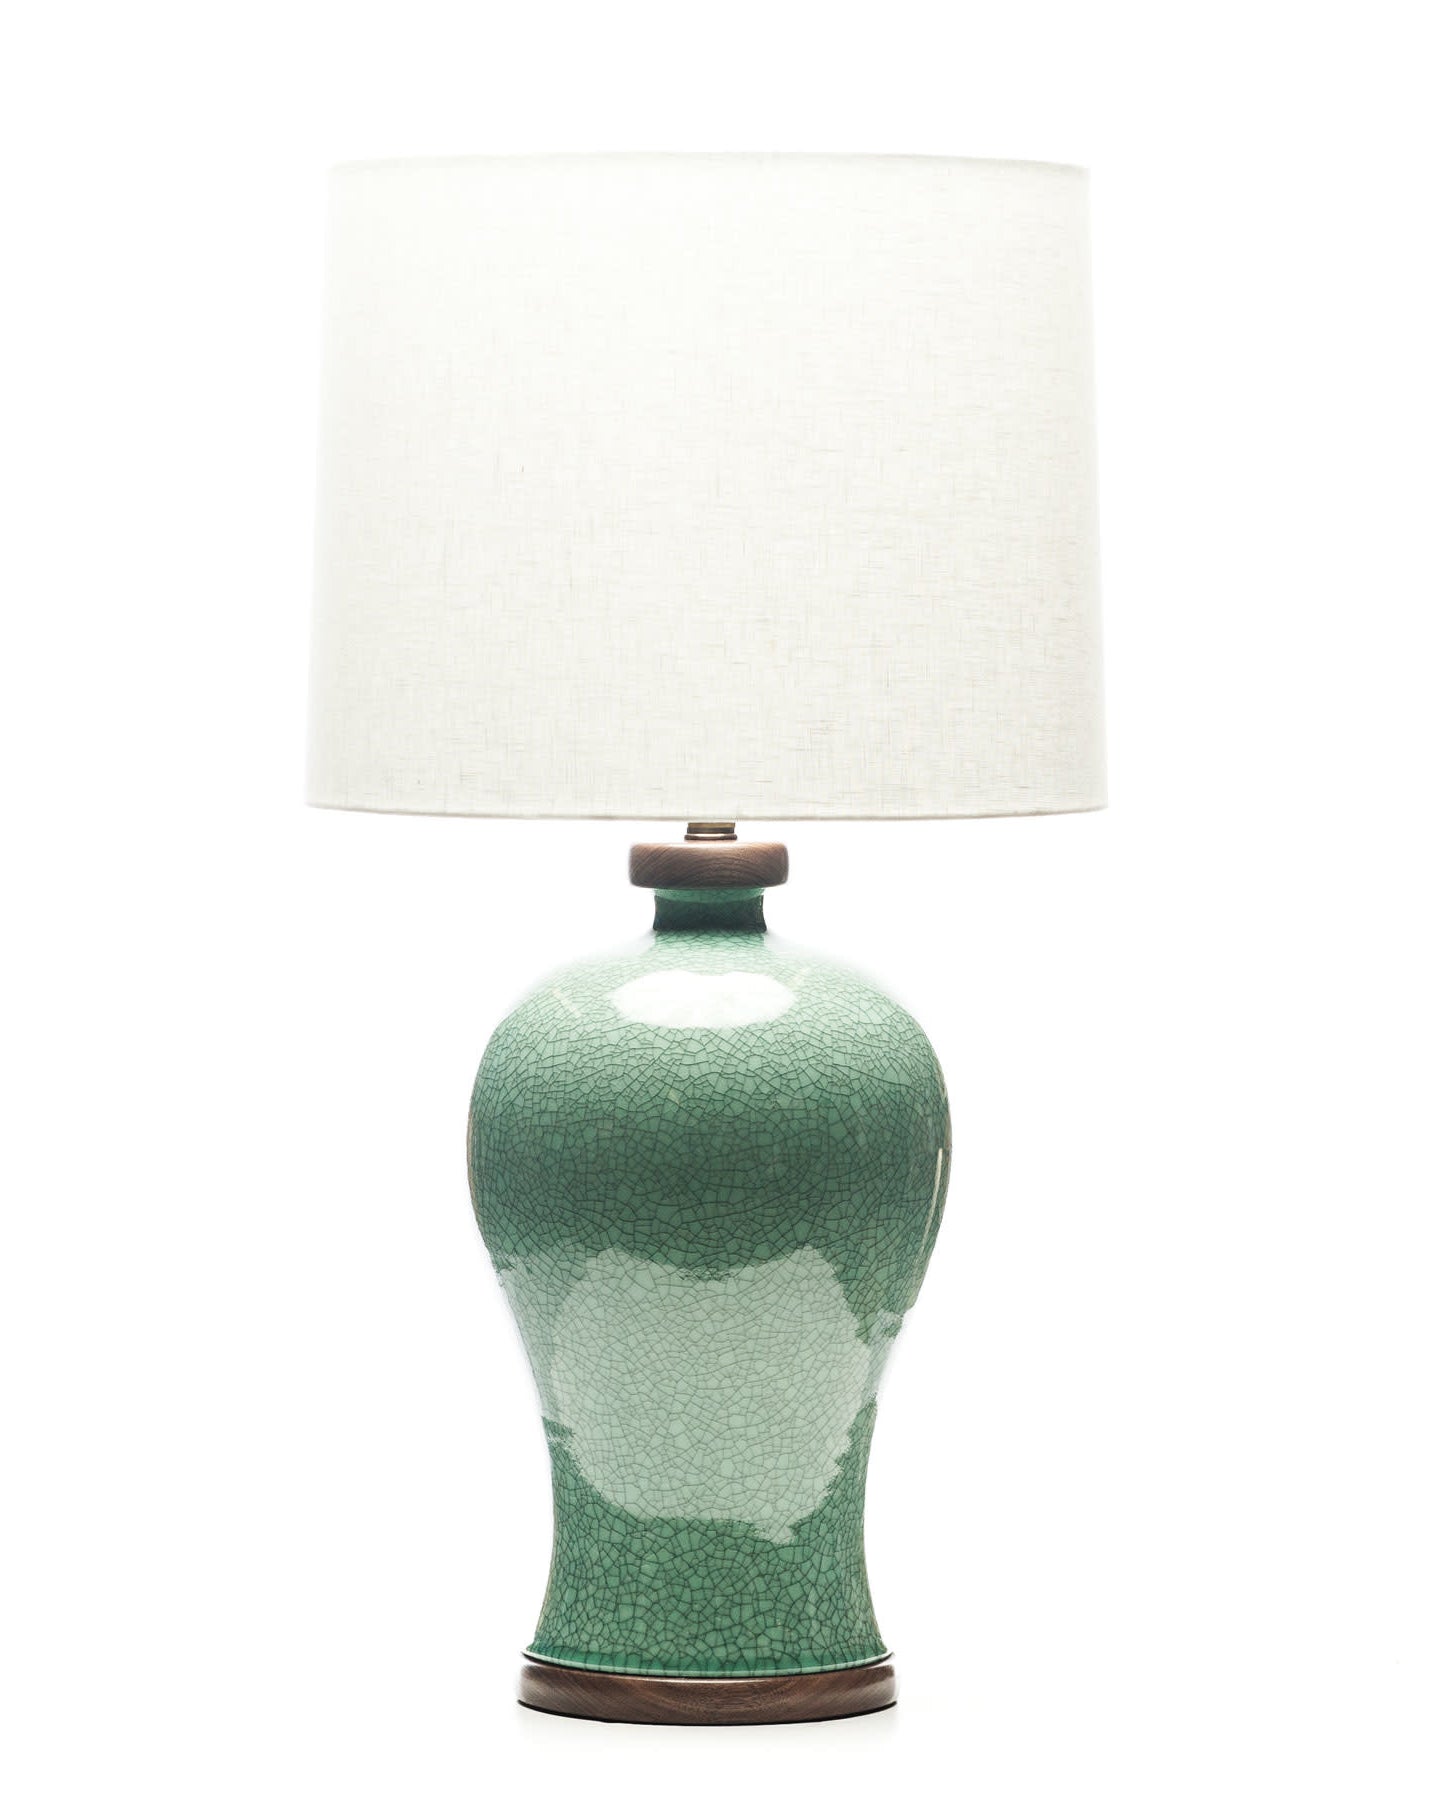 Lawrence & Scott Dashiell Table Lamp in Aquamarine Crackle with Walnut Base